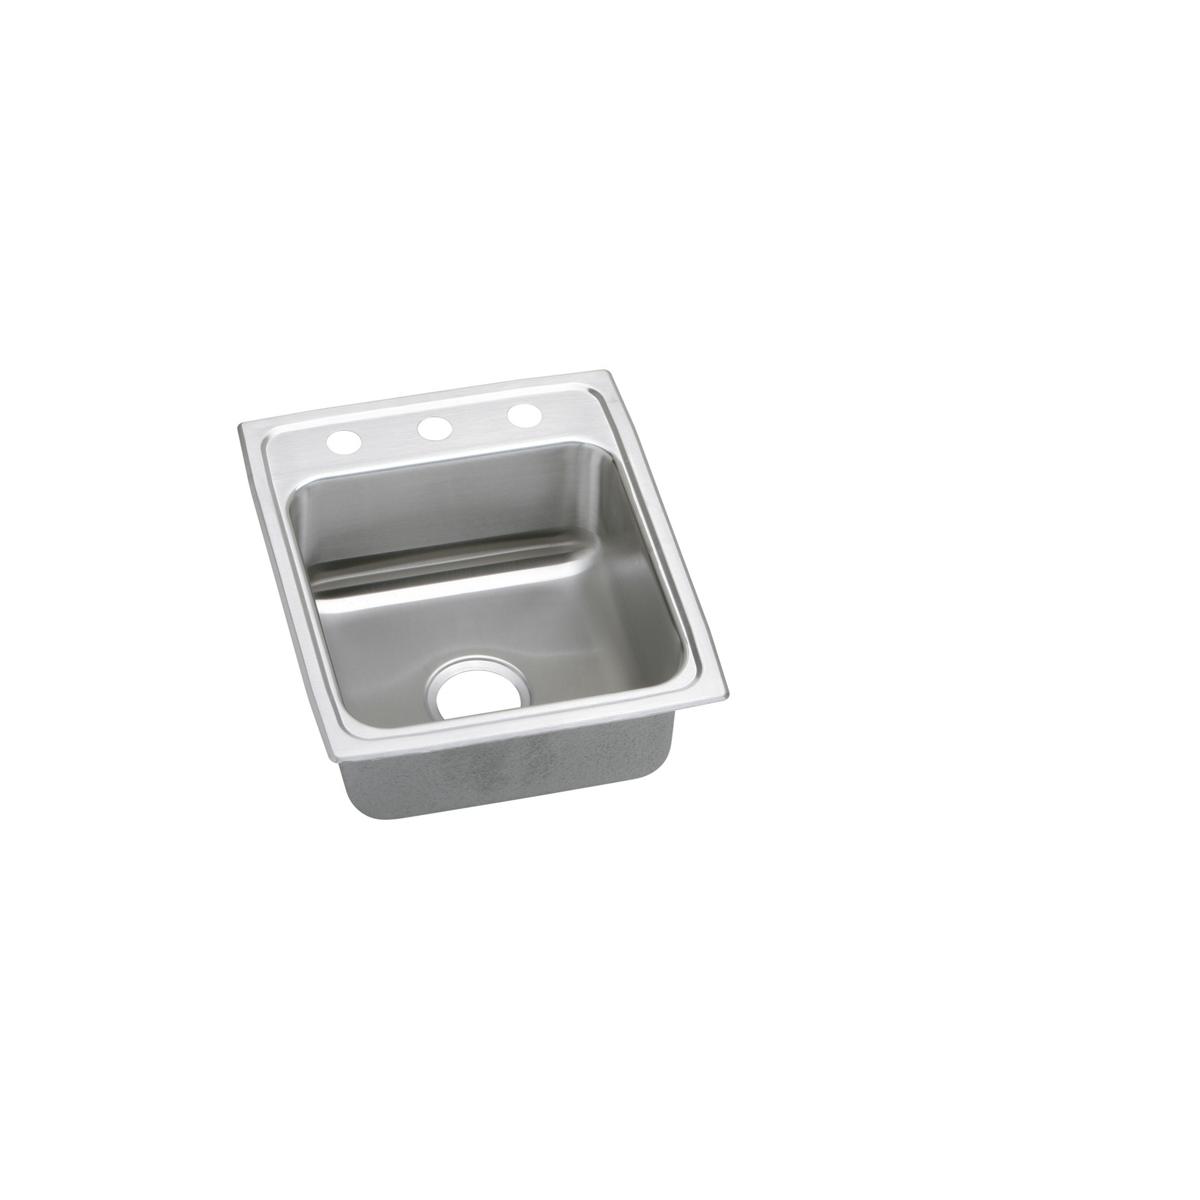 Elkay Lustertone Classic 17" x 20" x 6" Single Bowl Drop-in ADA Sink with Quick-clip